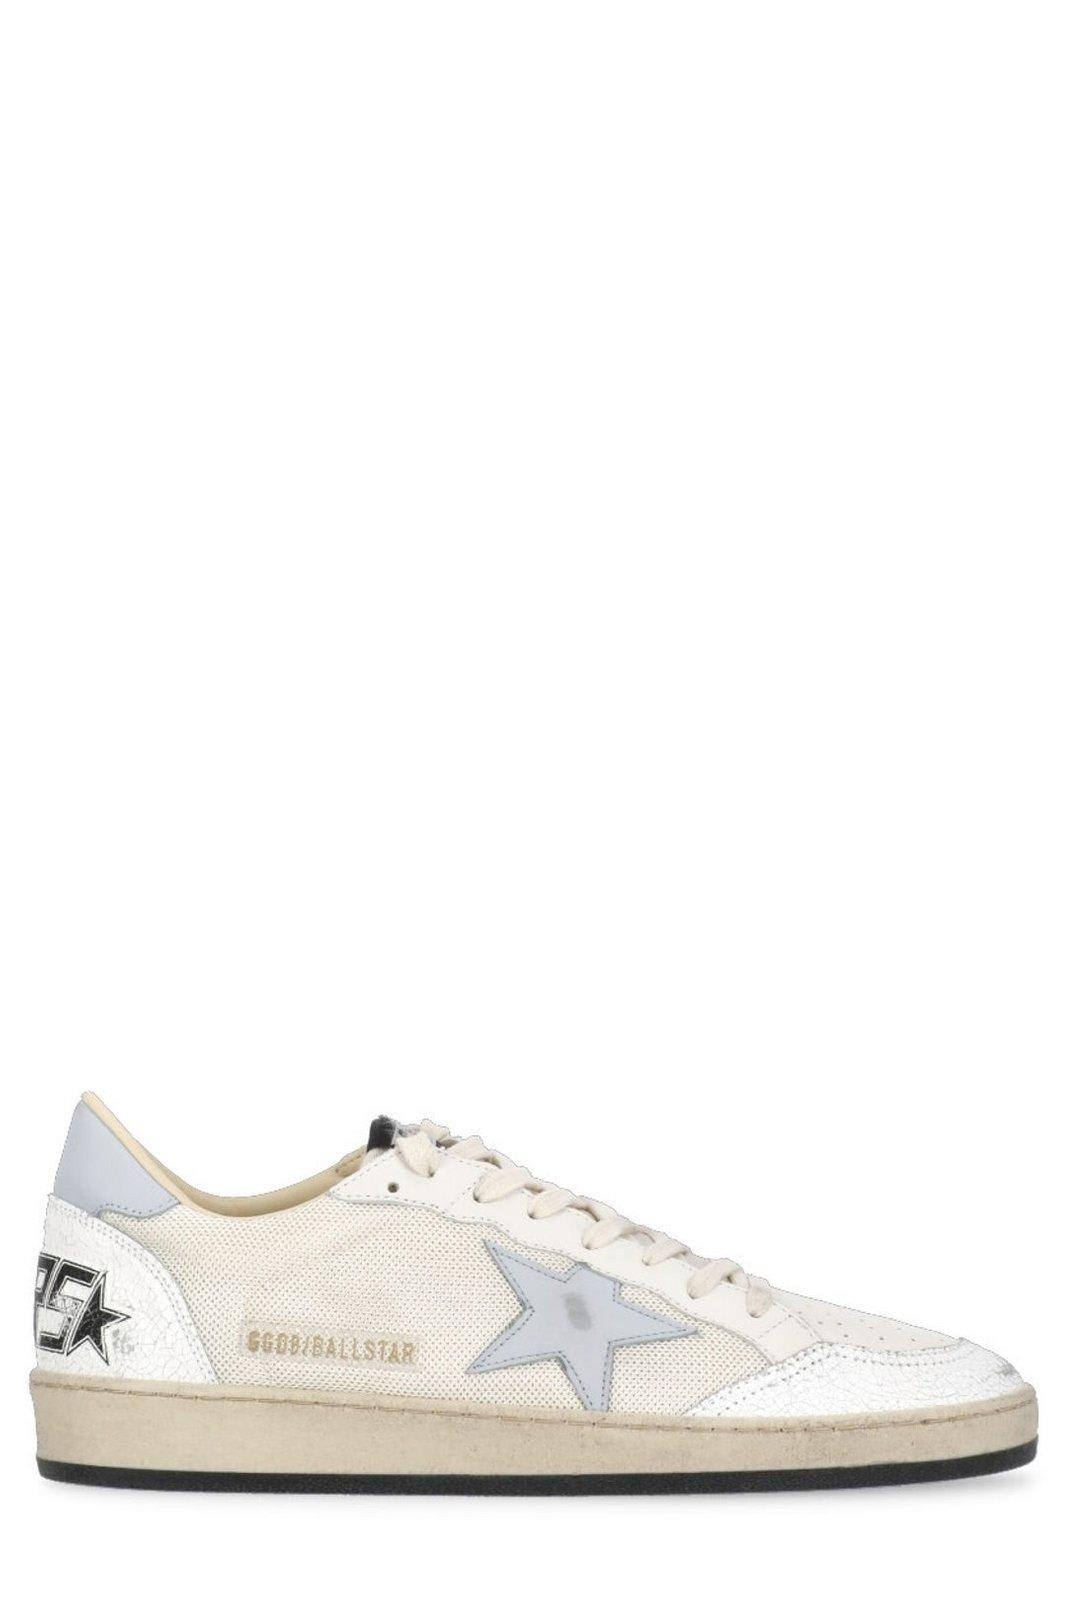 Golden Goose Star Patch Lace-up Sneakers In White/cream/gray